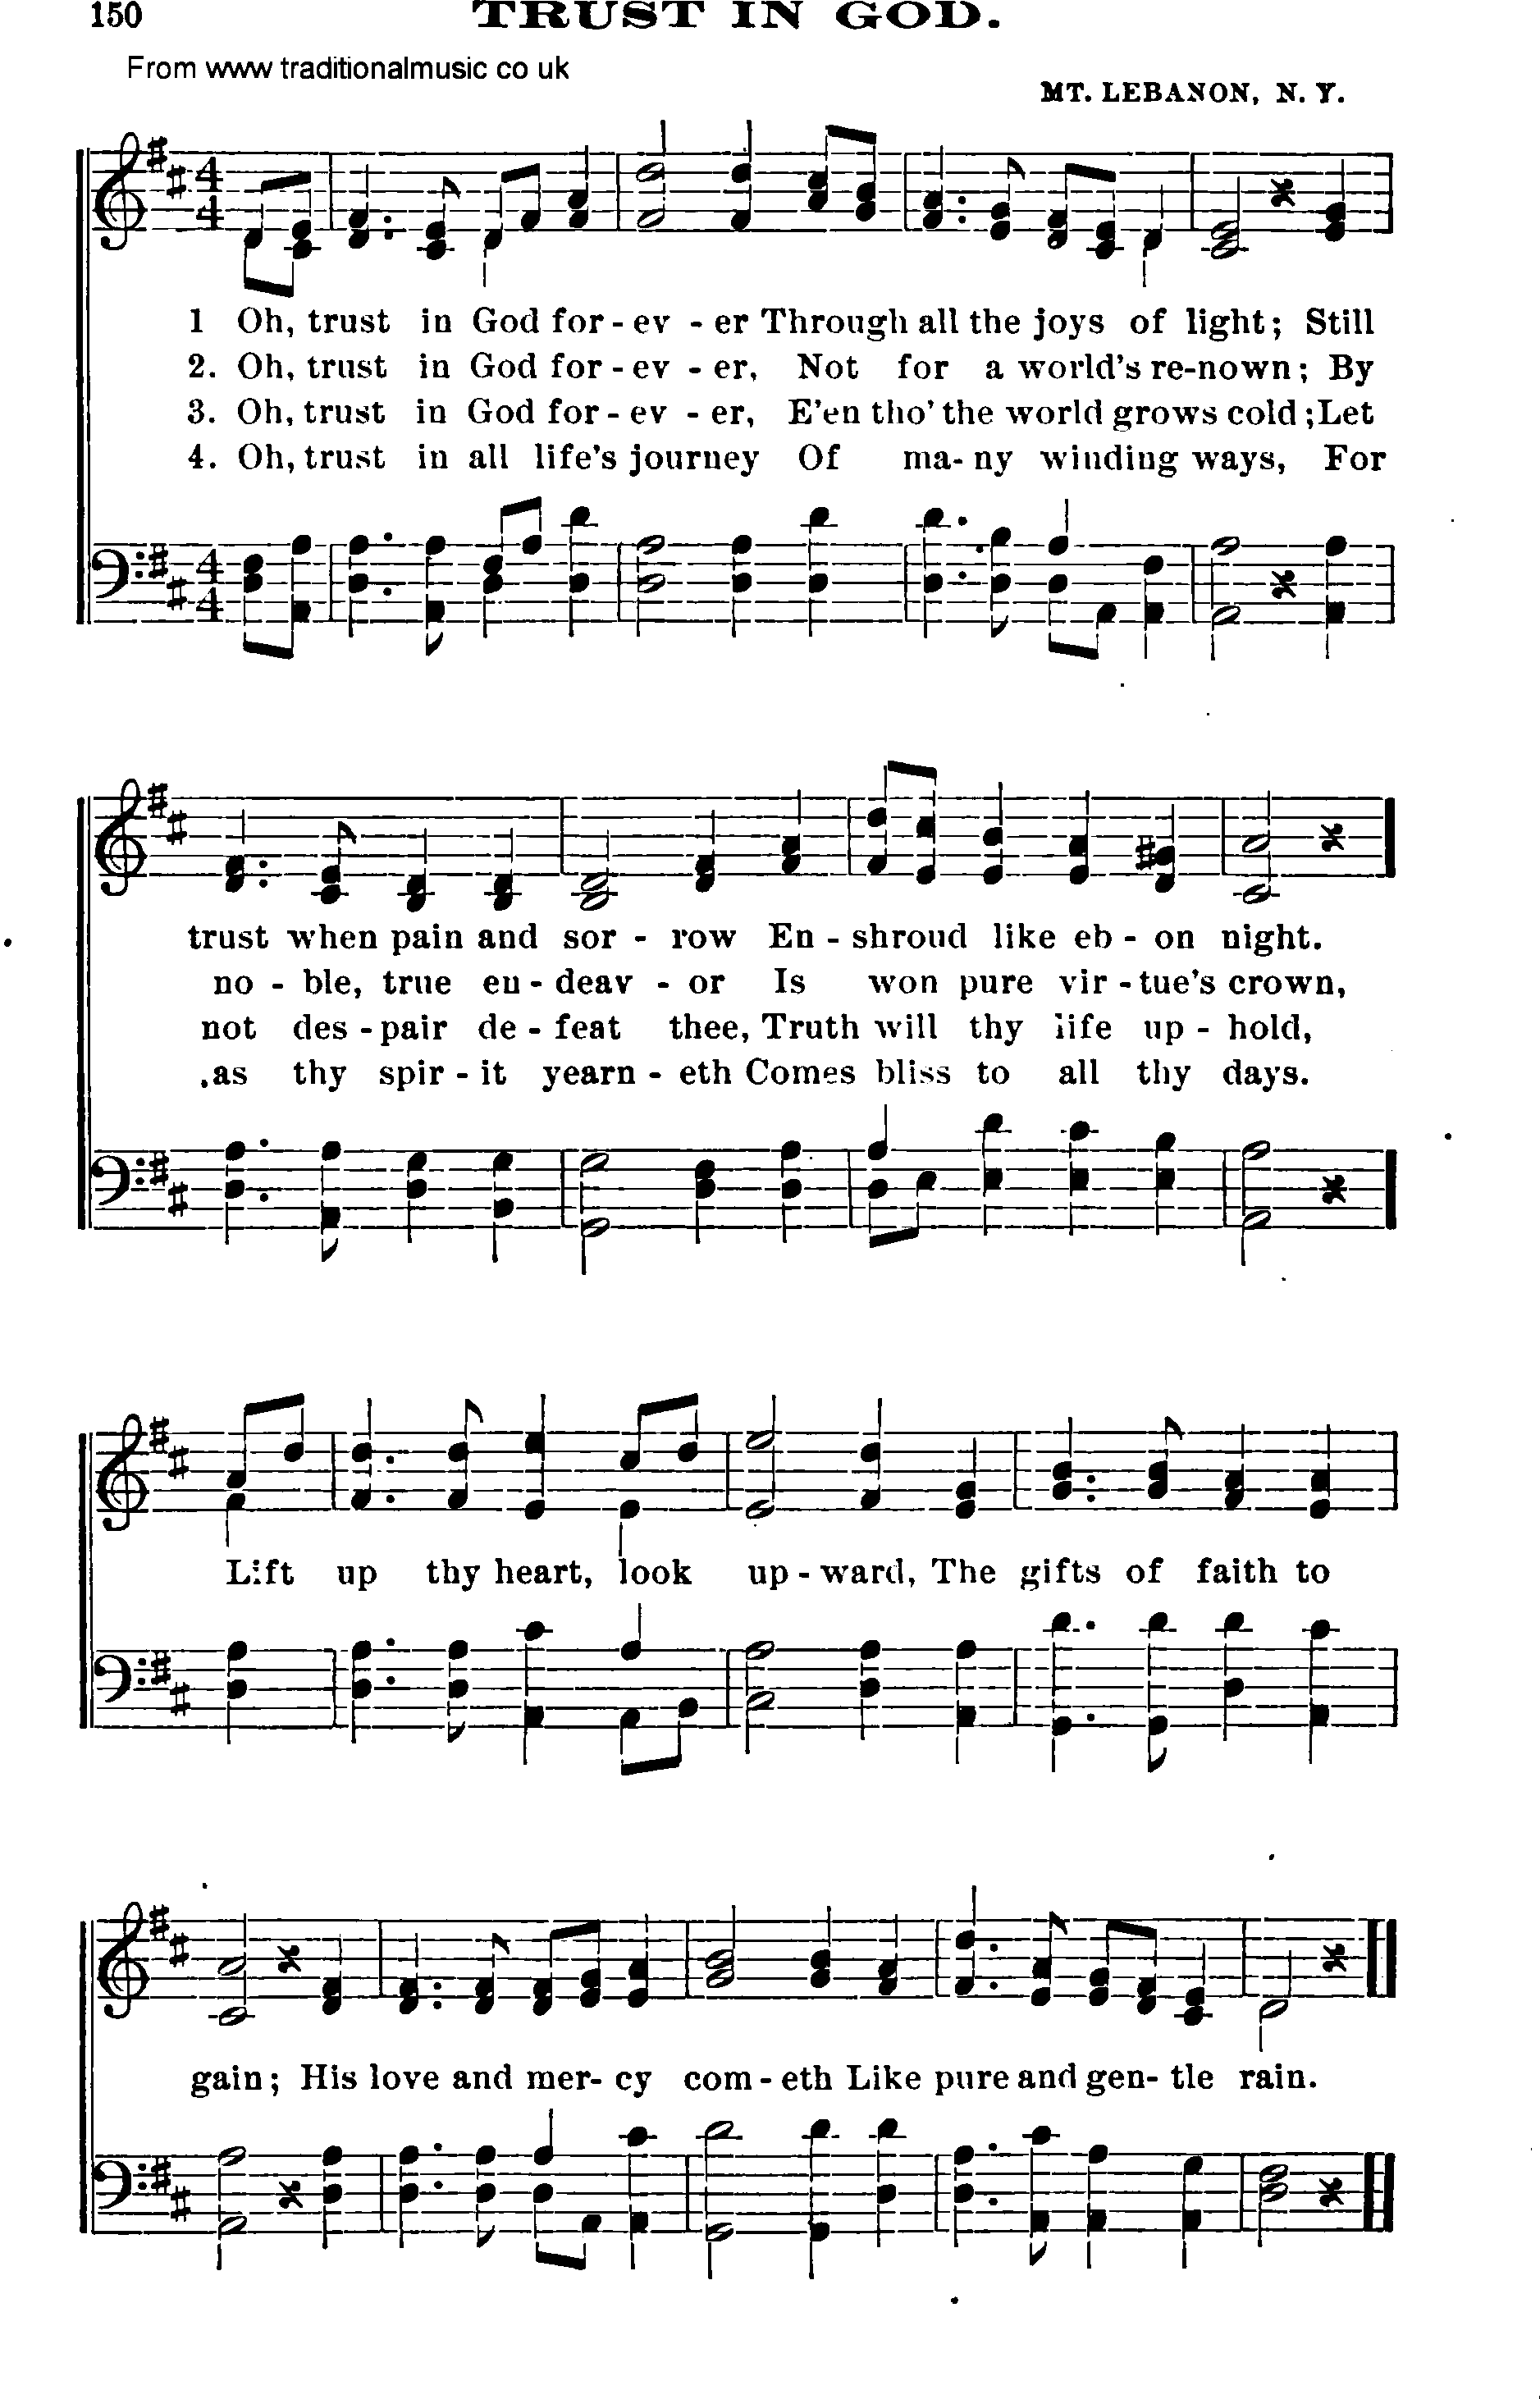 Shaker Music collection, Hymn: trust in god, sheetmusic and PDF